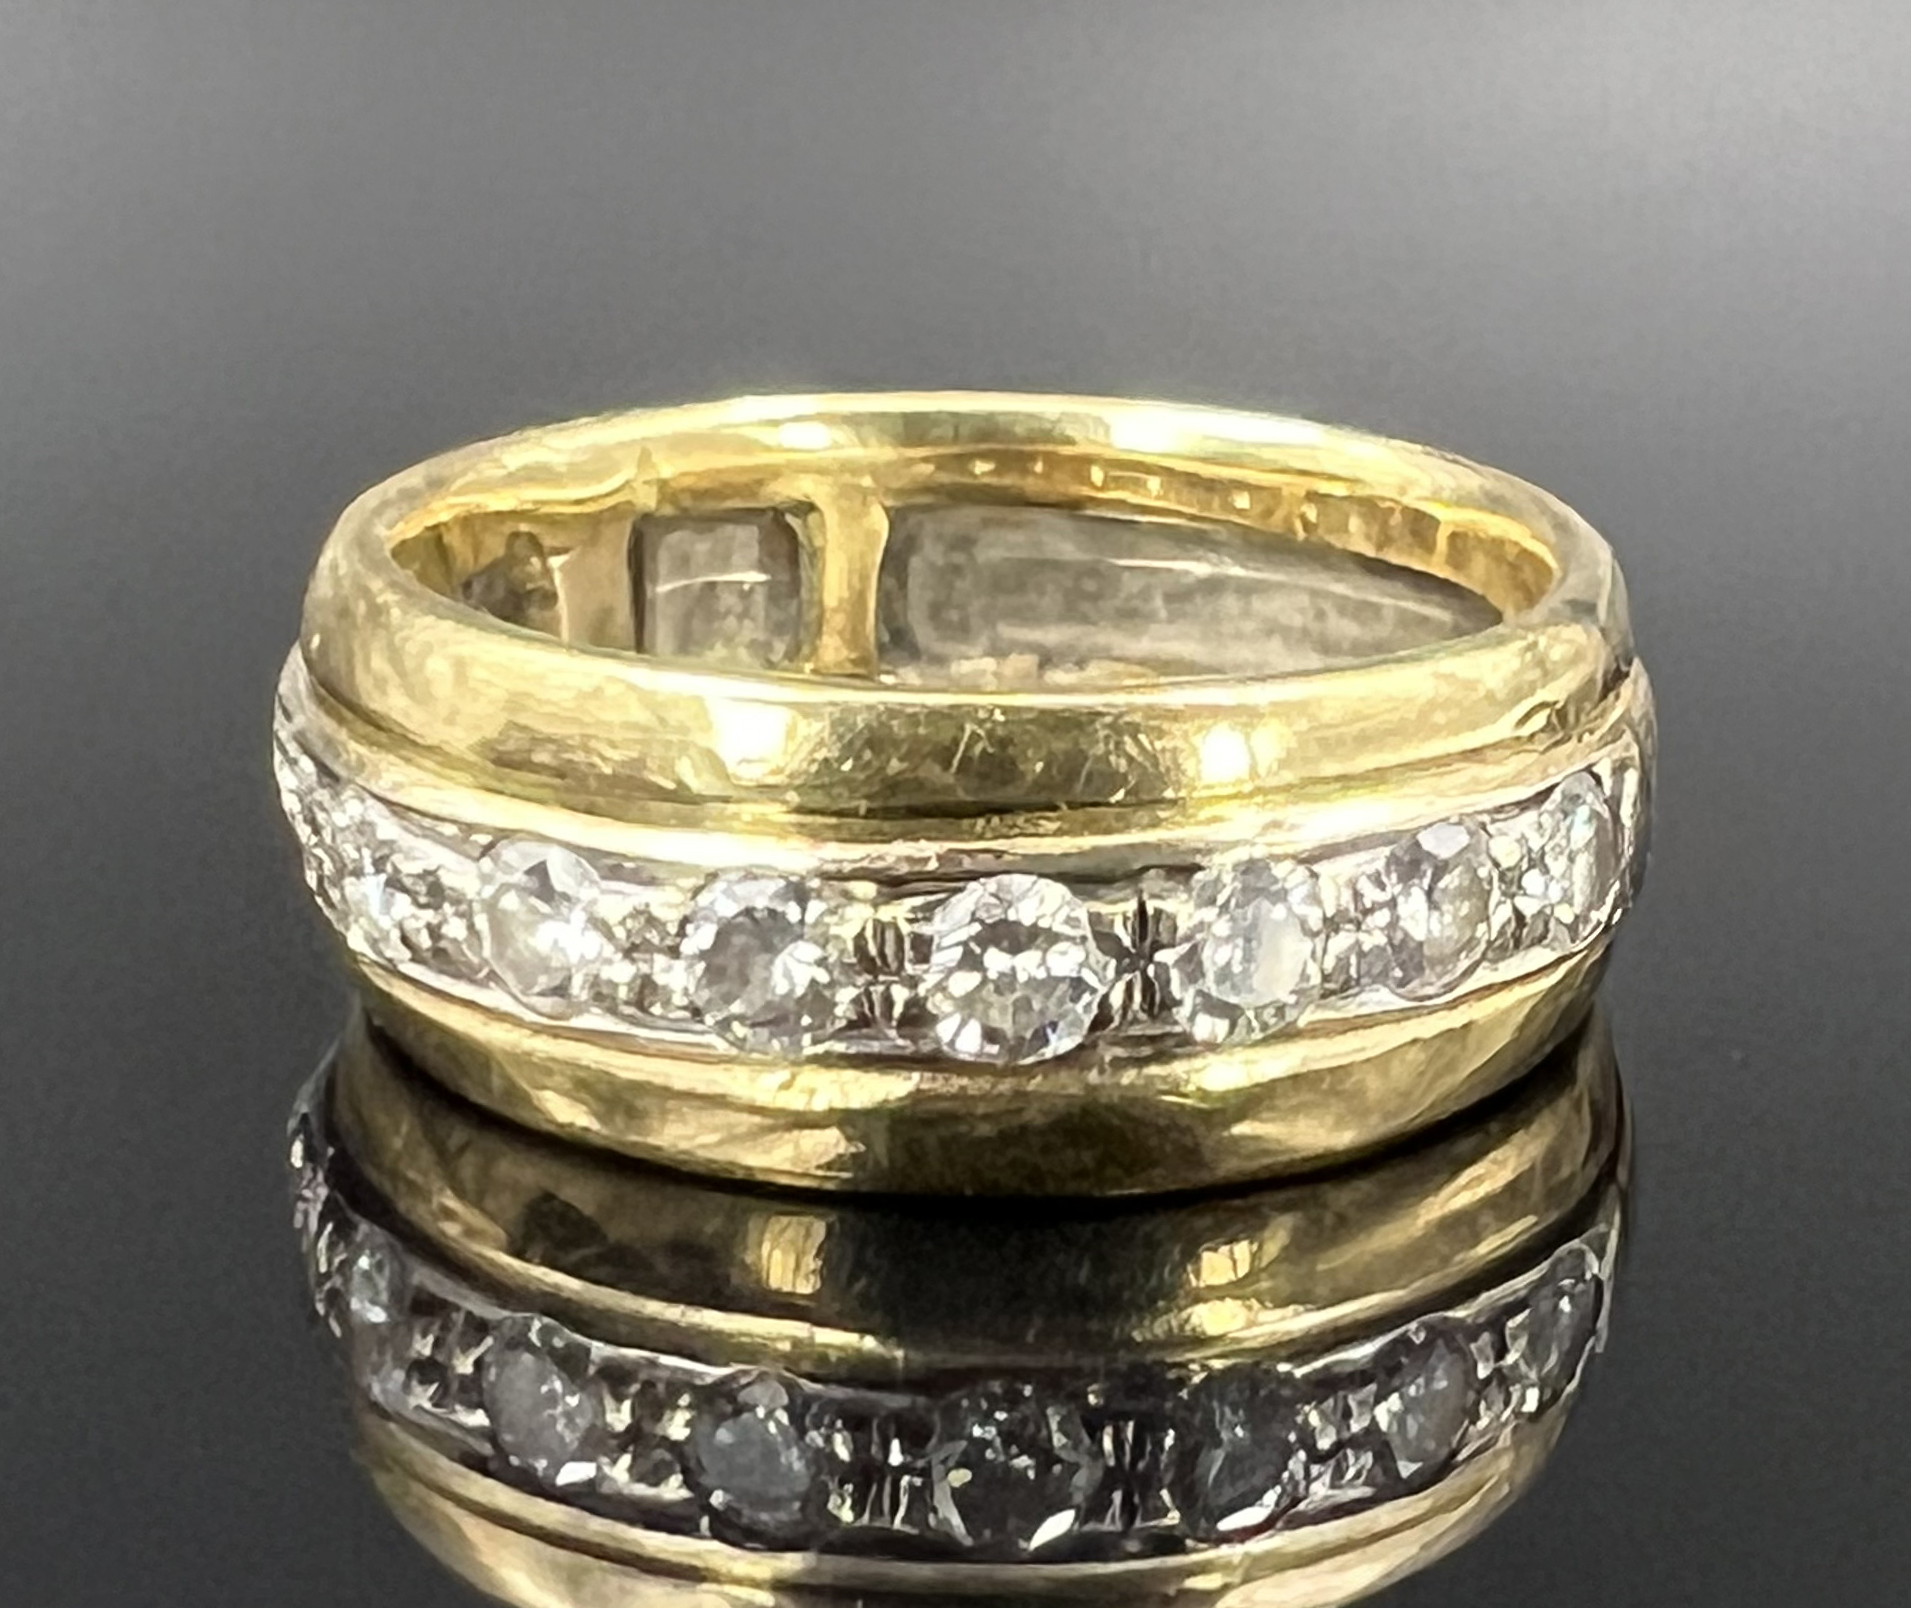 Ladies' ring. 750 yellow gold and white gold with 10 small diamonds.